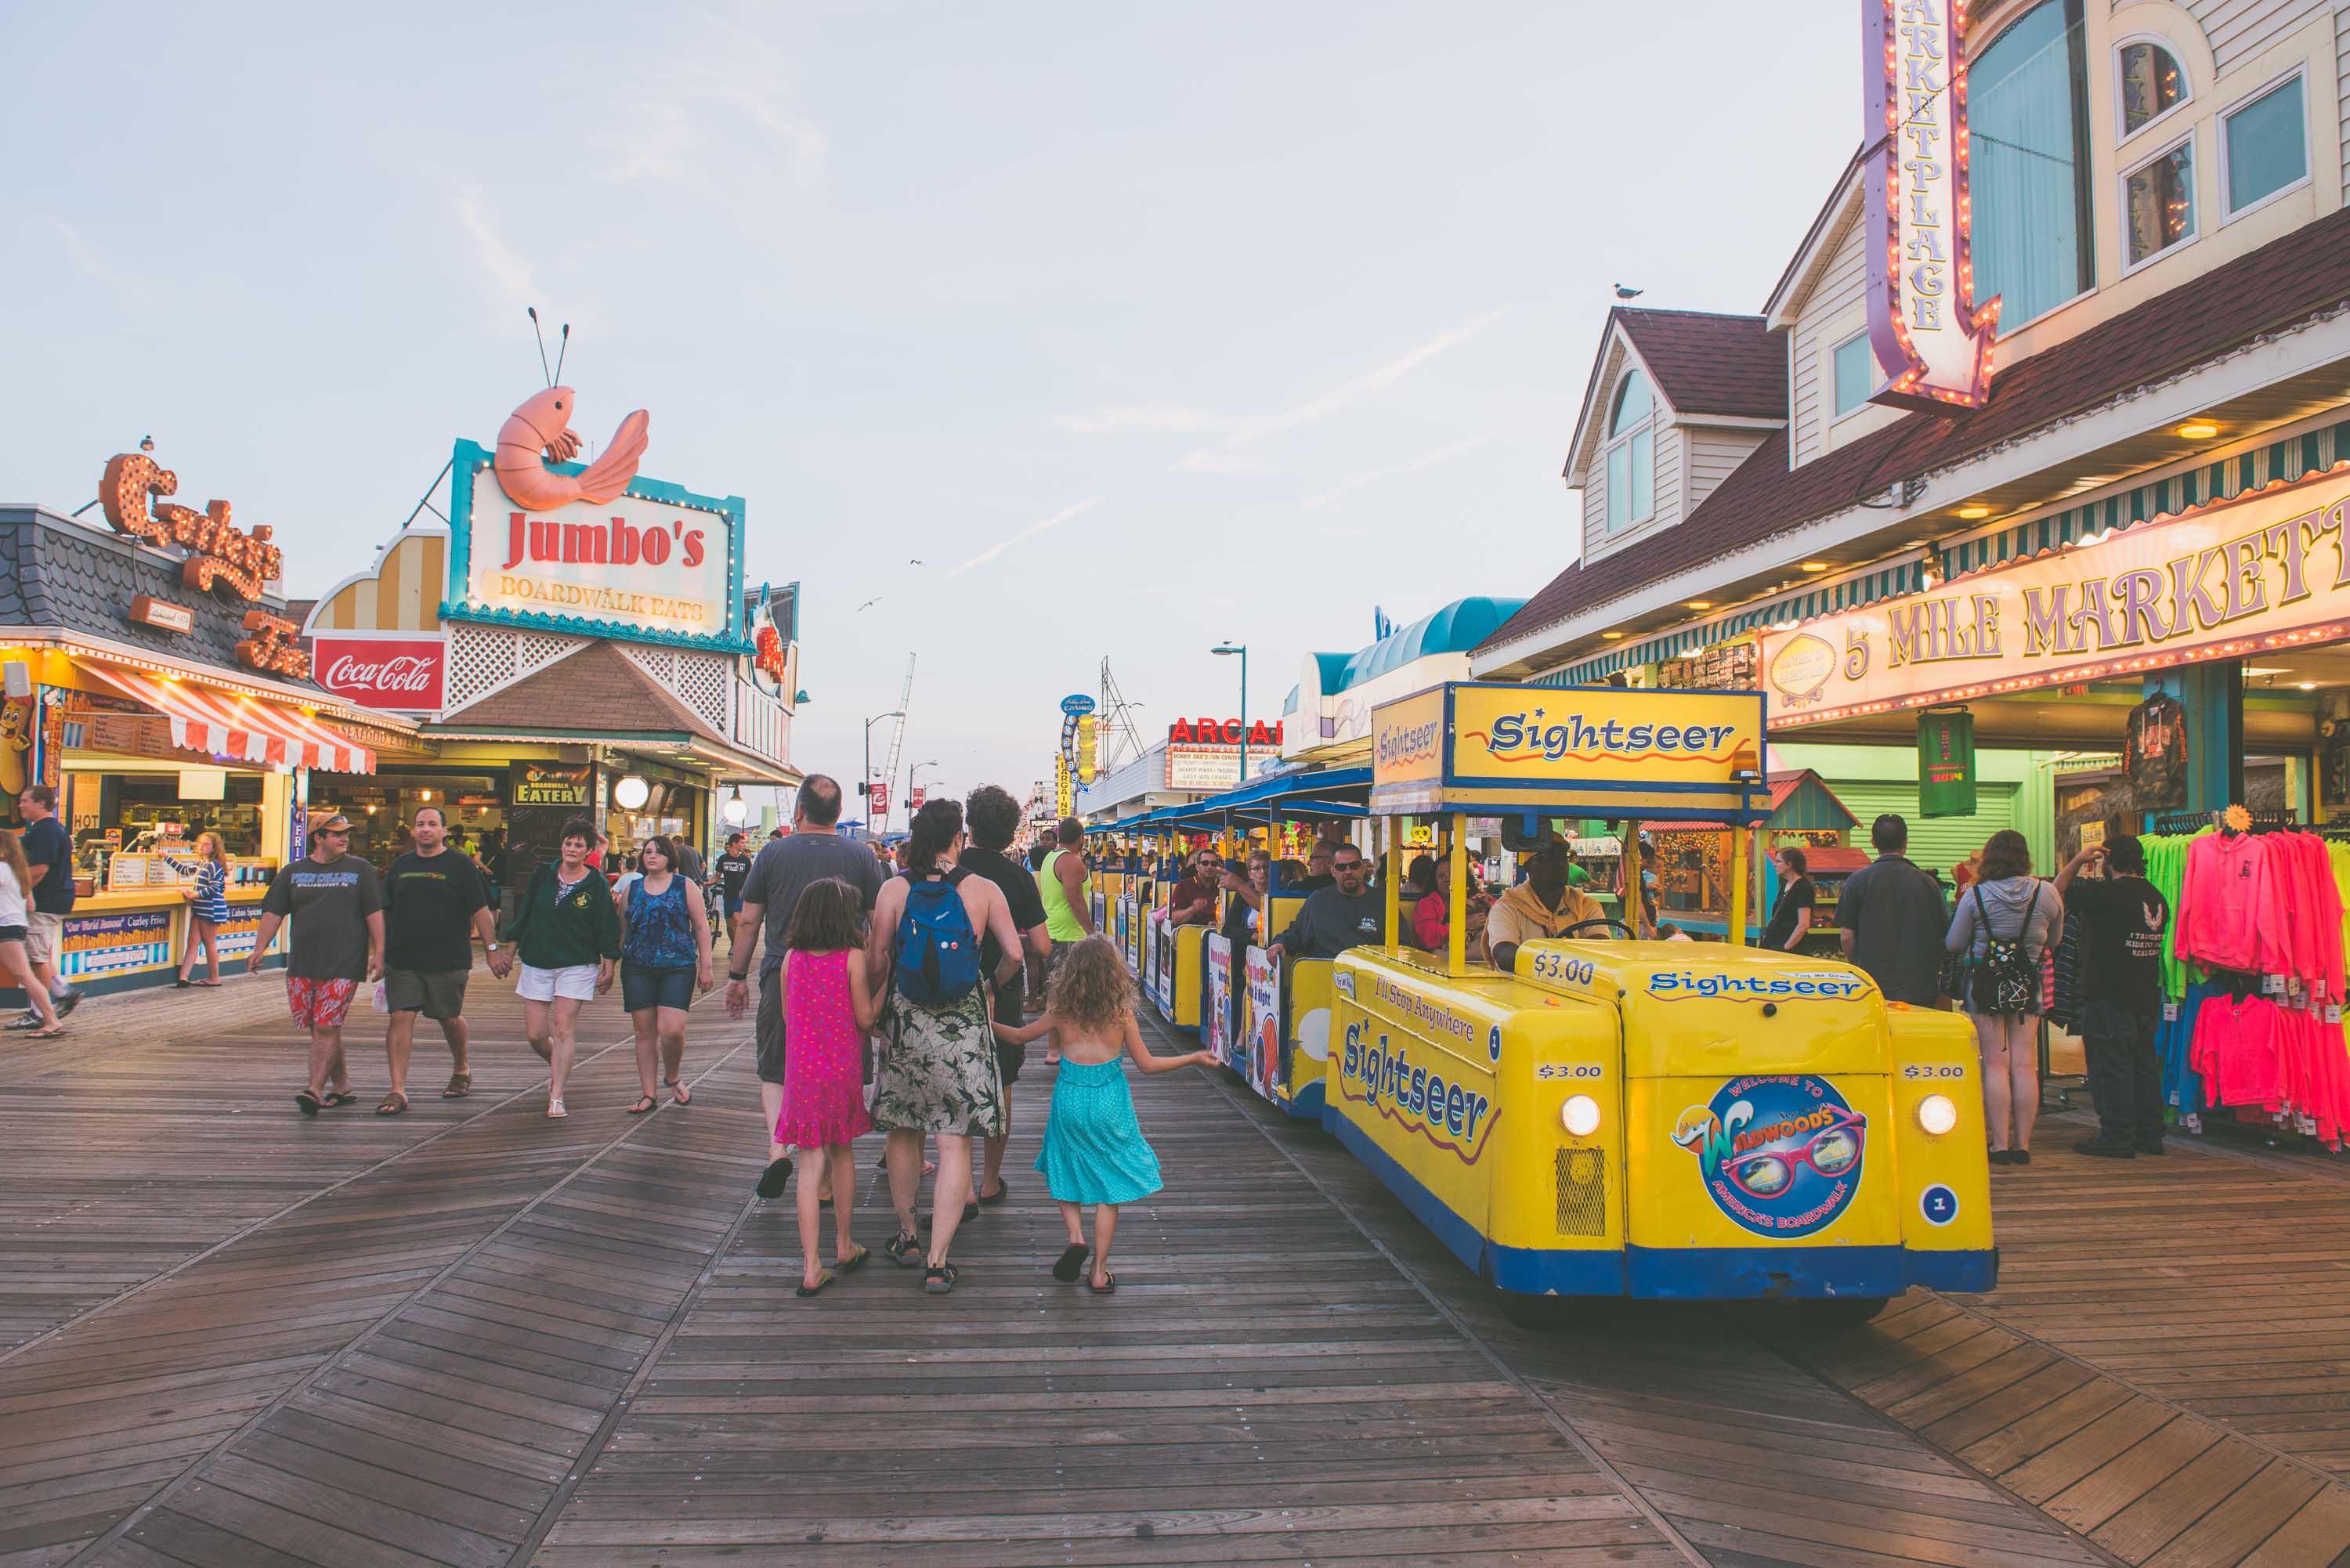 Photos of Wildwood, a New Jersey icon dressed in neon | Adventure.com